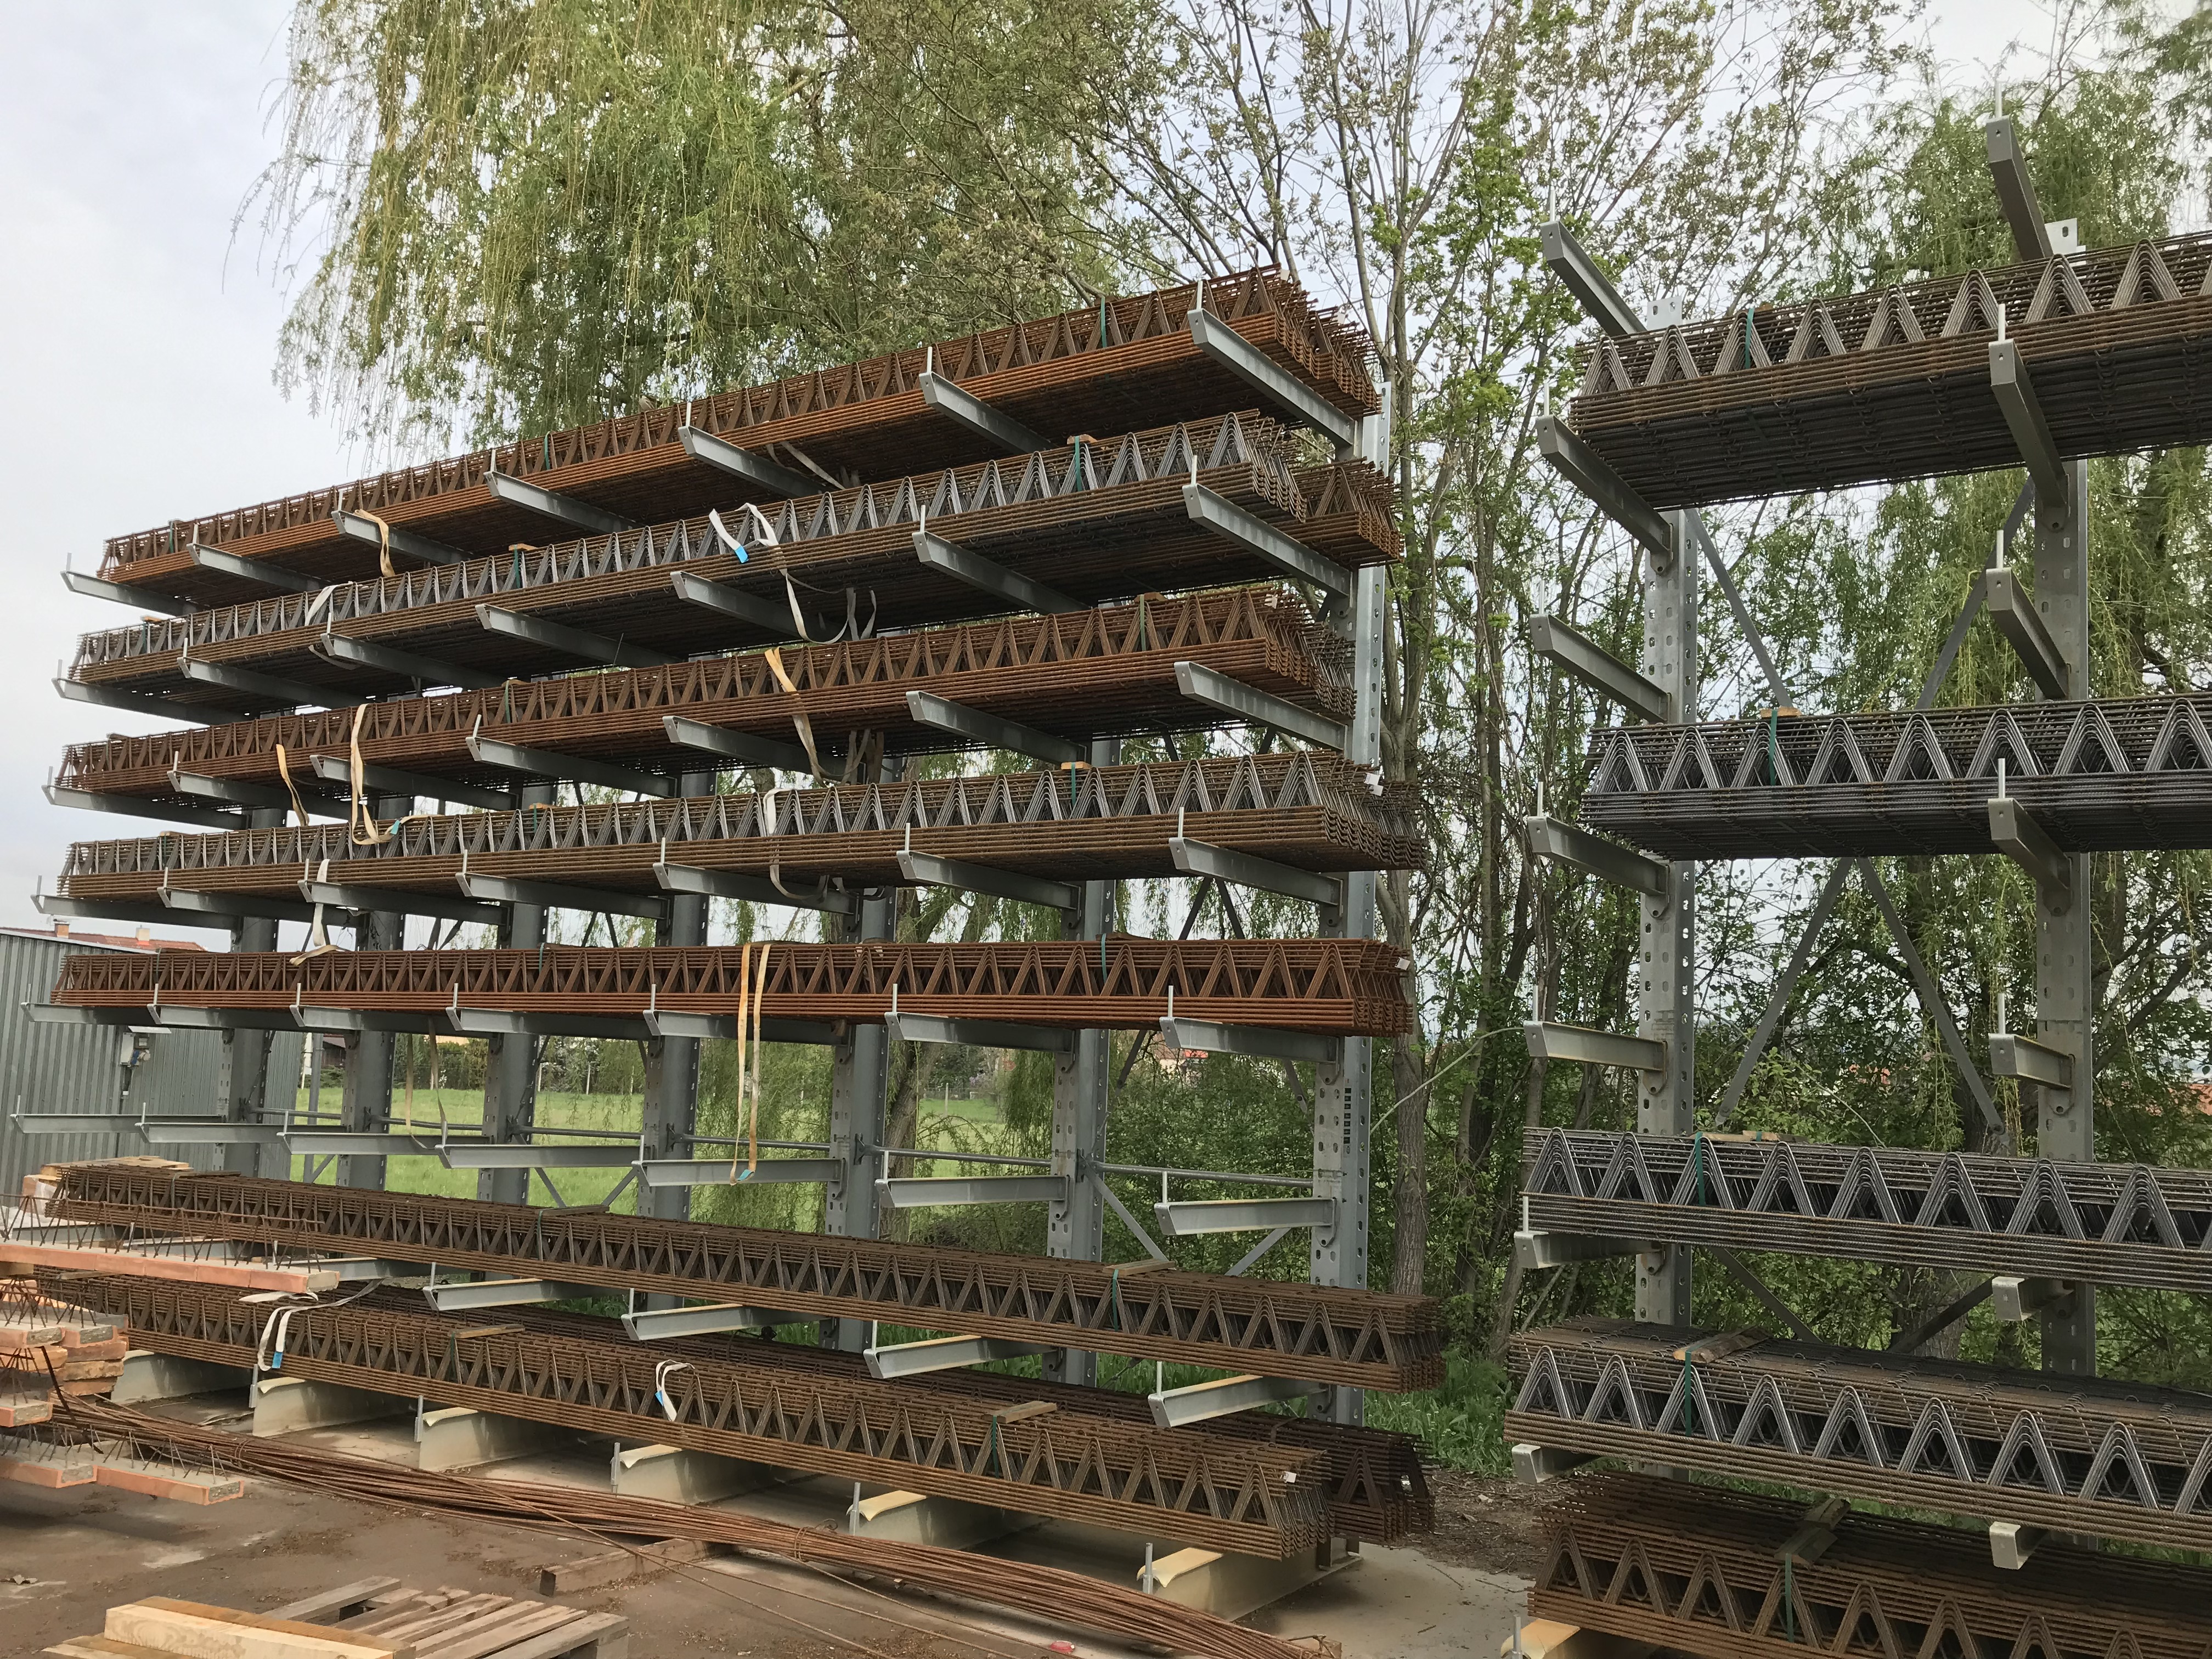 cantilever racking system, galvanized